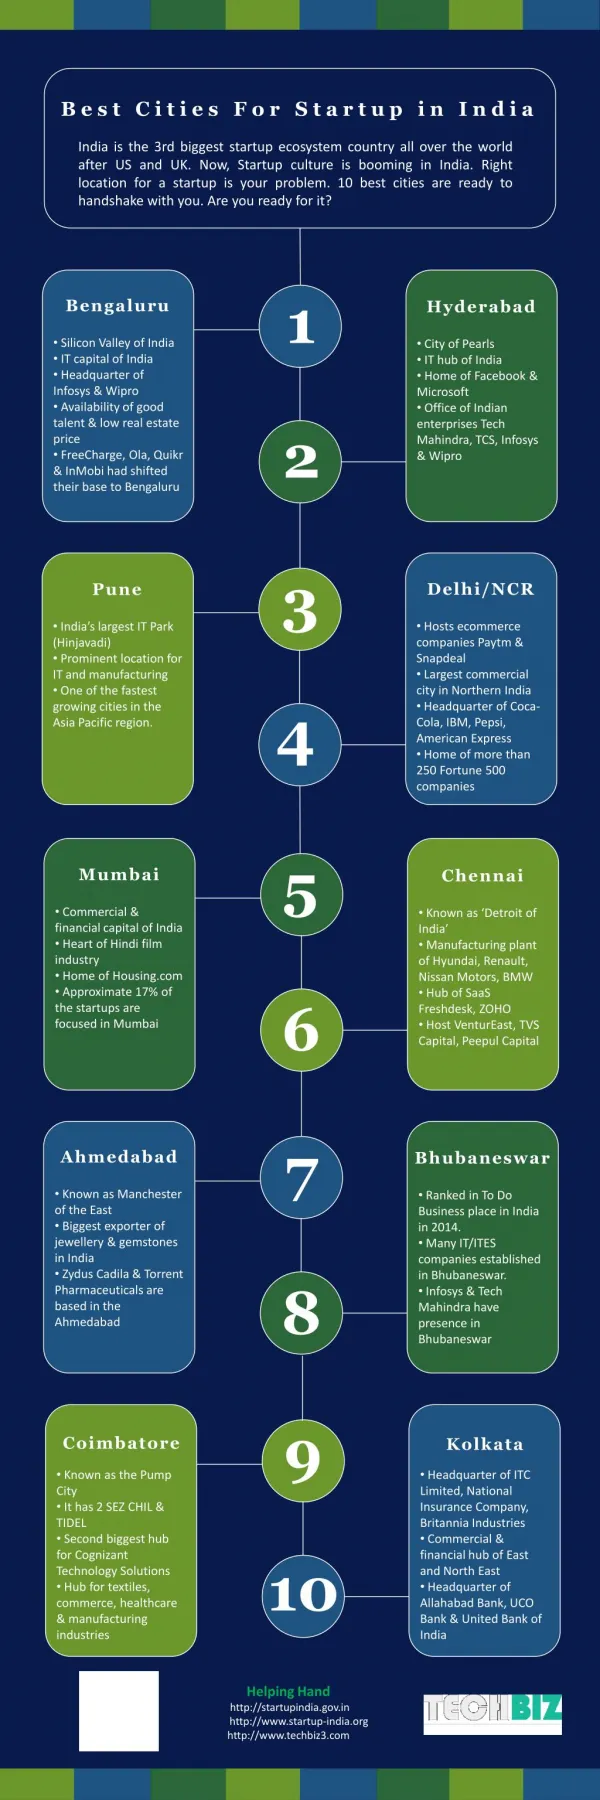 Best Cities For Startup in India